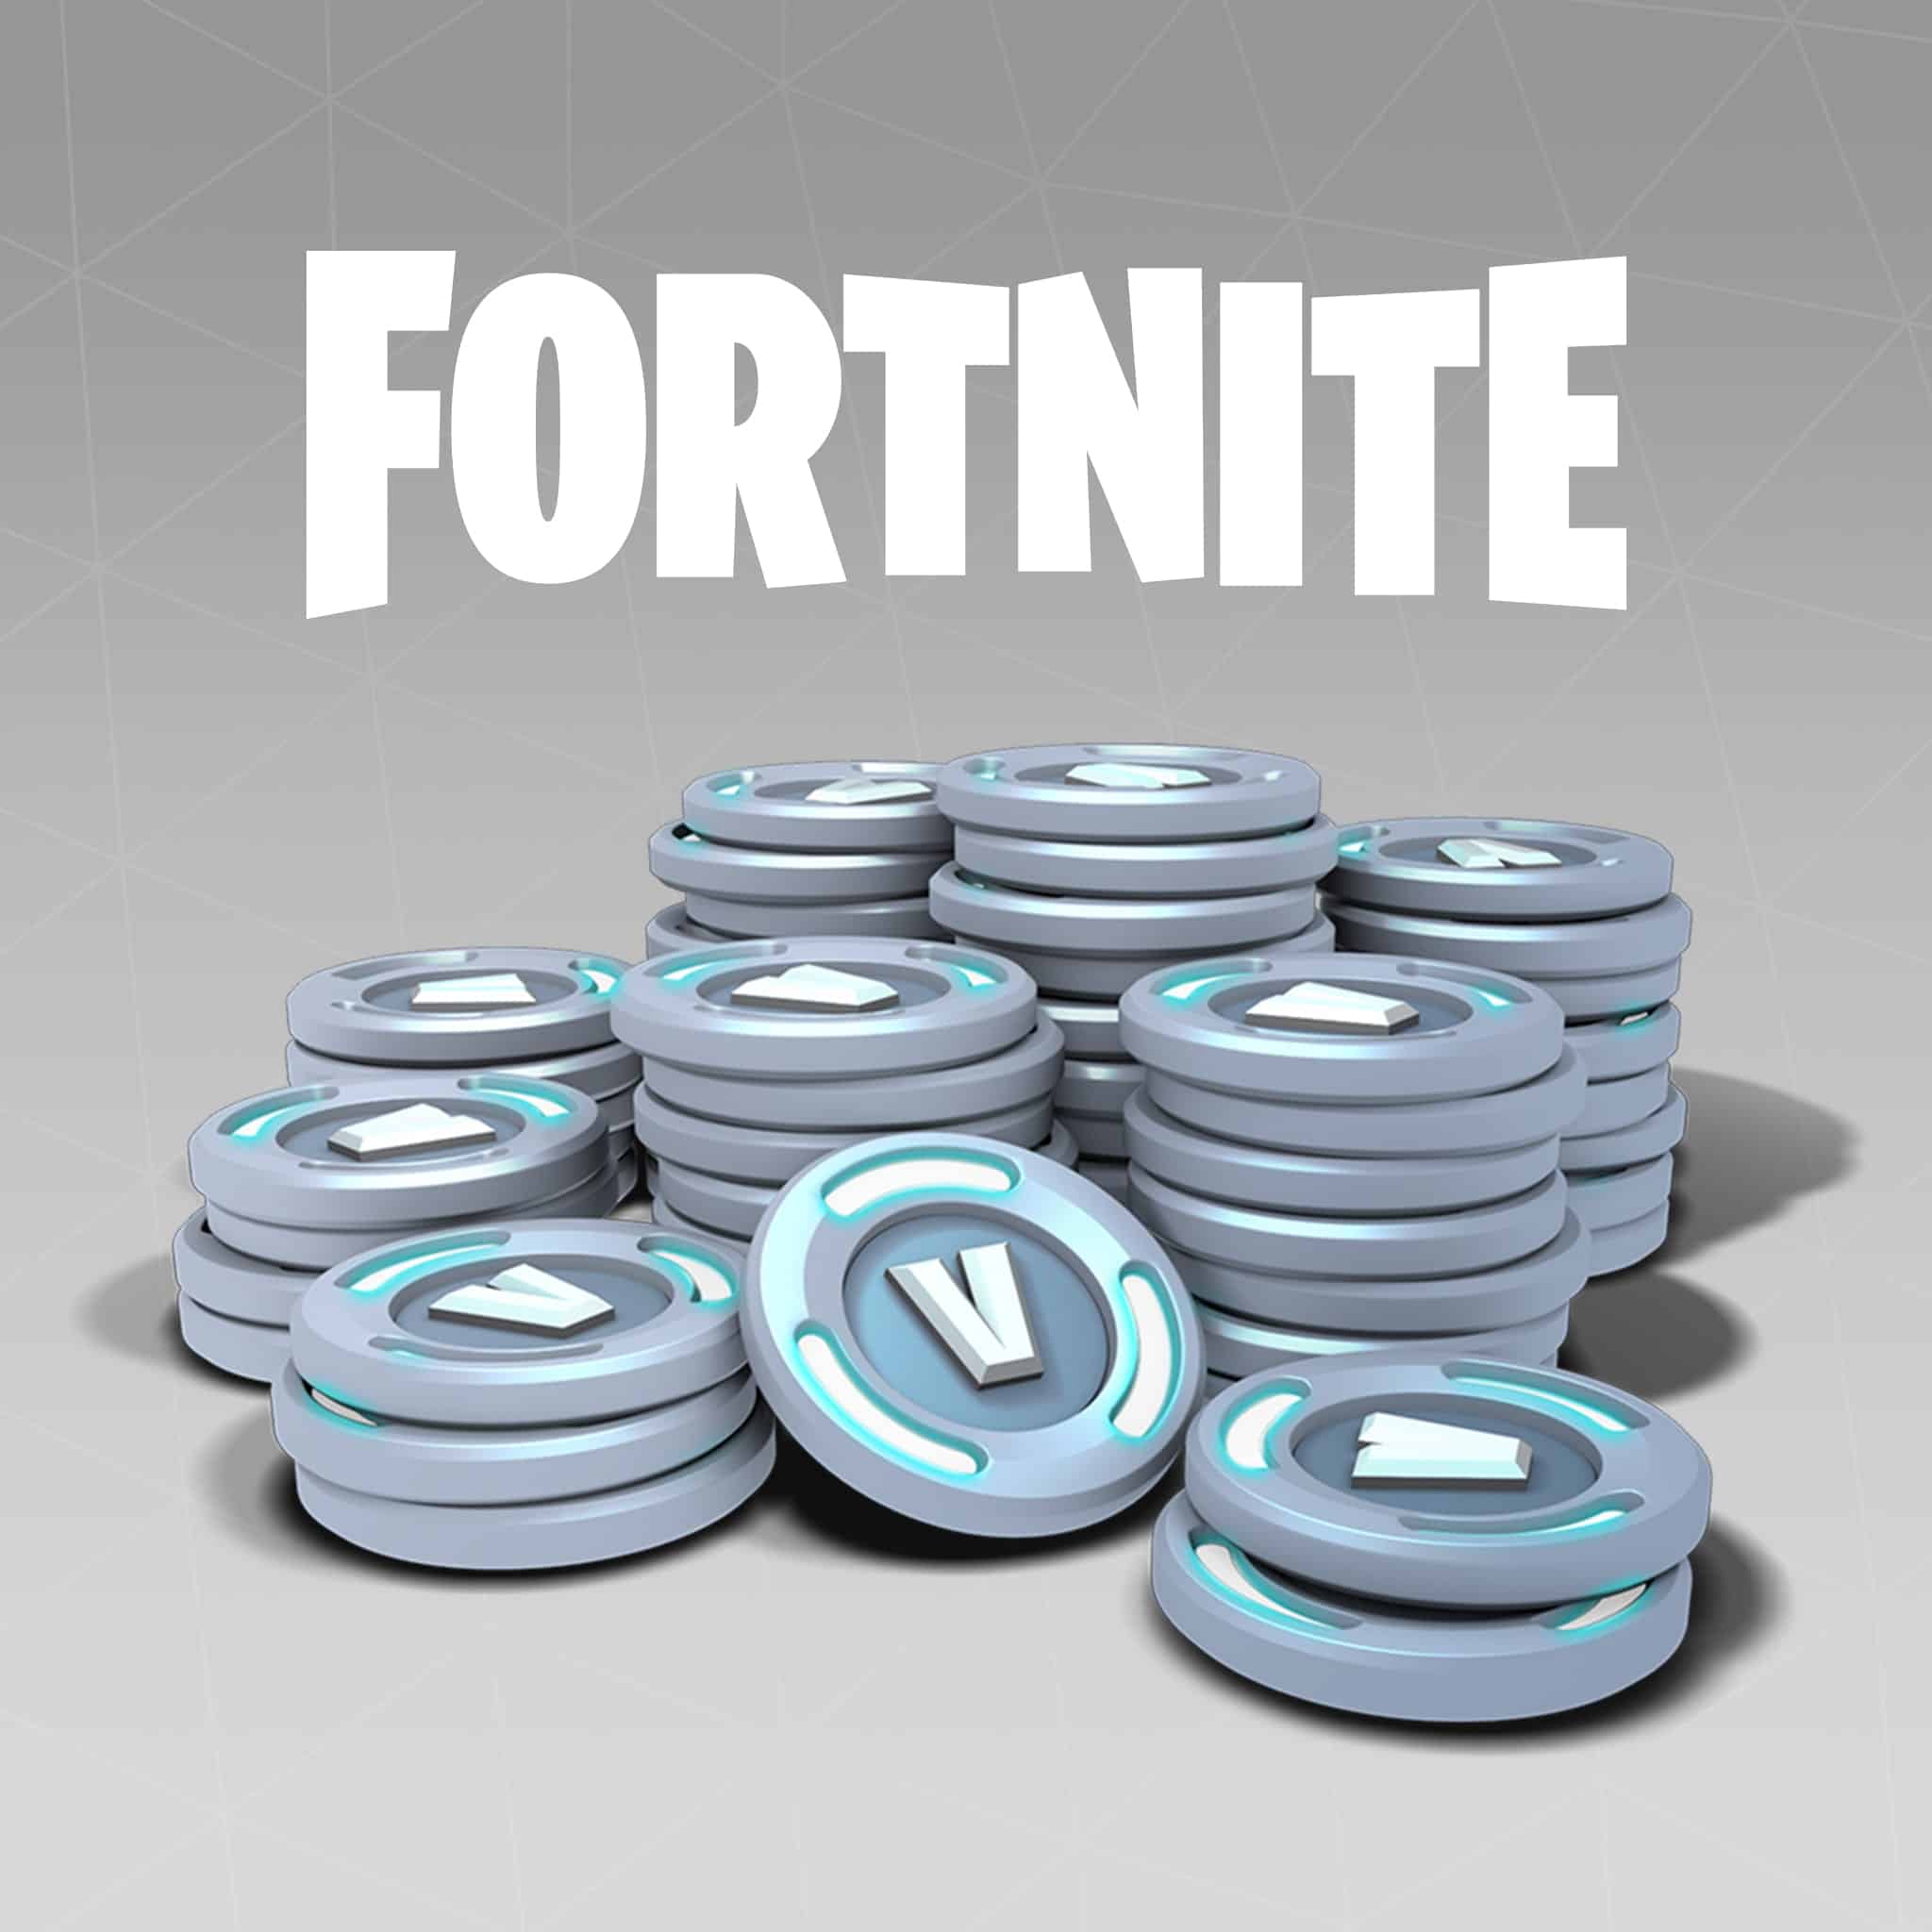 Fortnite V-Bucks are now on sale – permanently